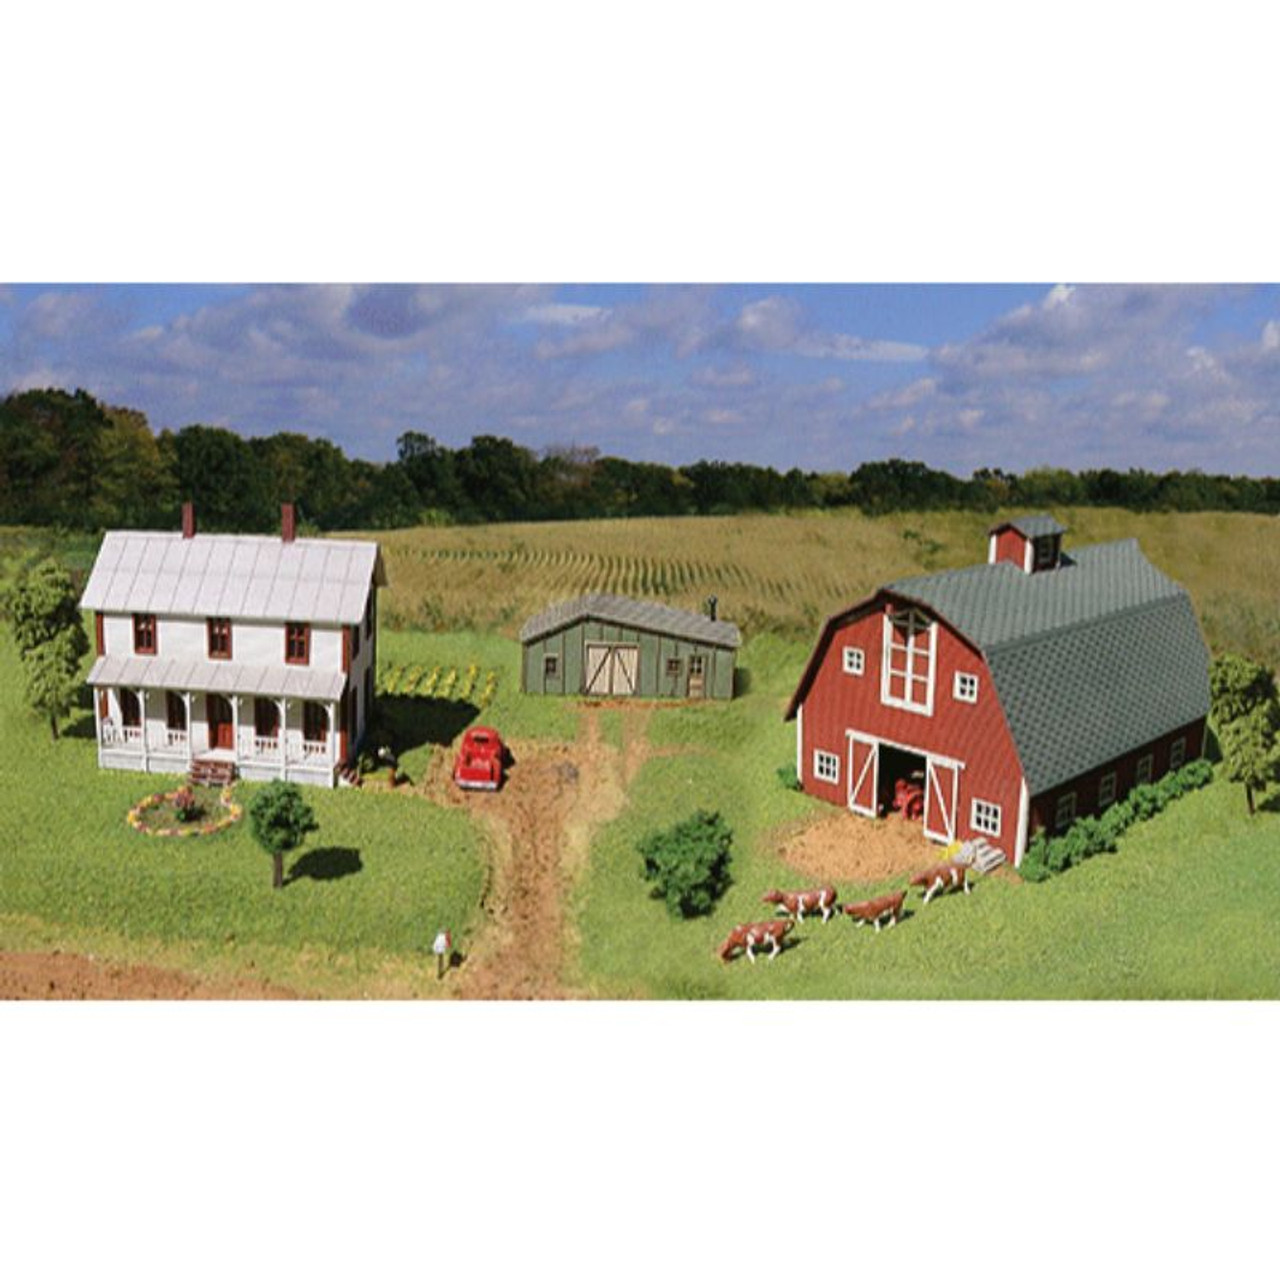 Scale kit for Farms, Homestead or Industrial applications. Easy